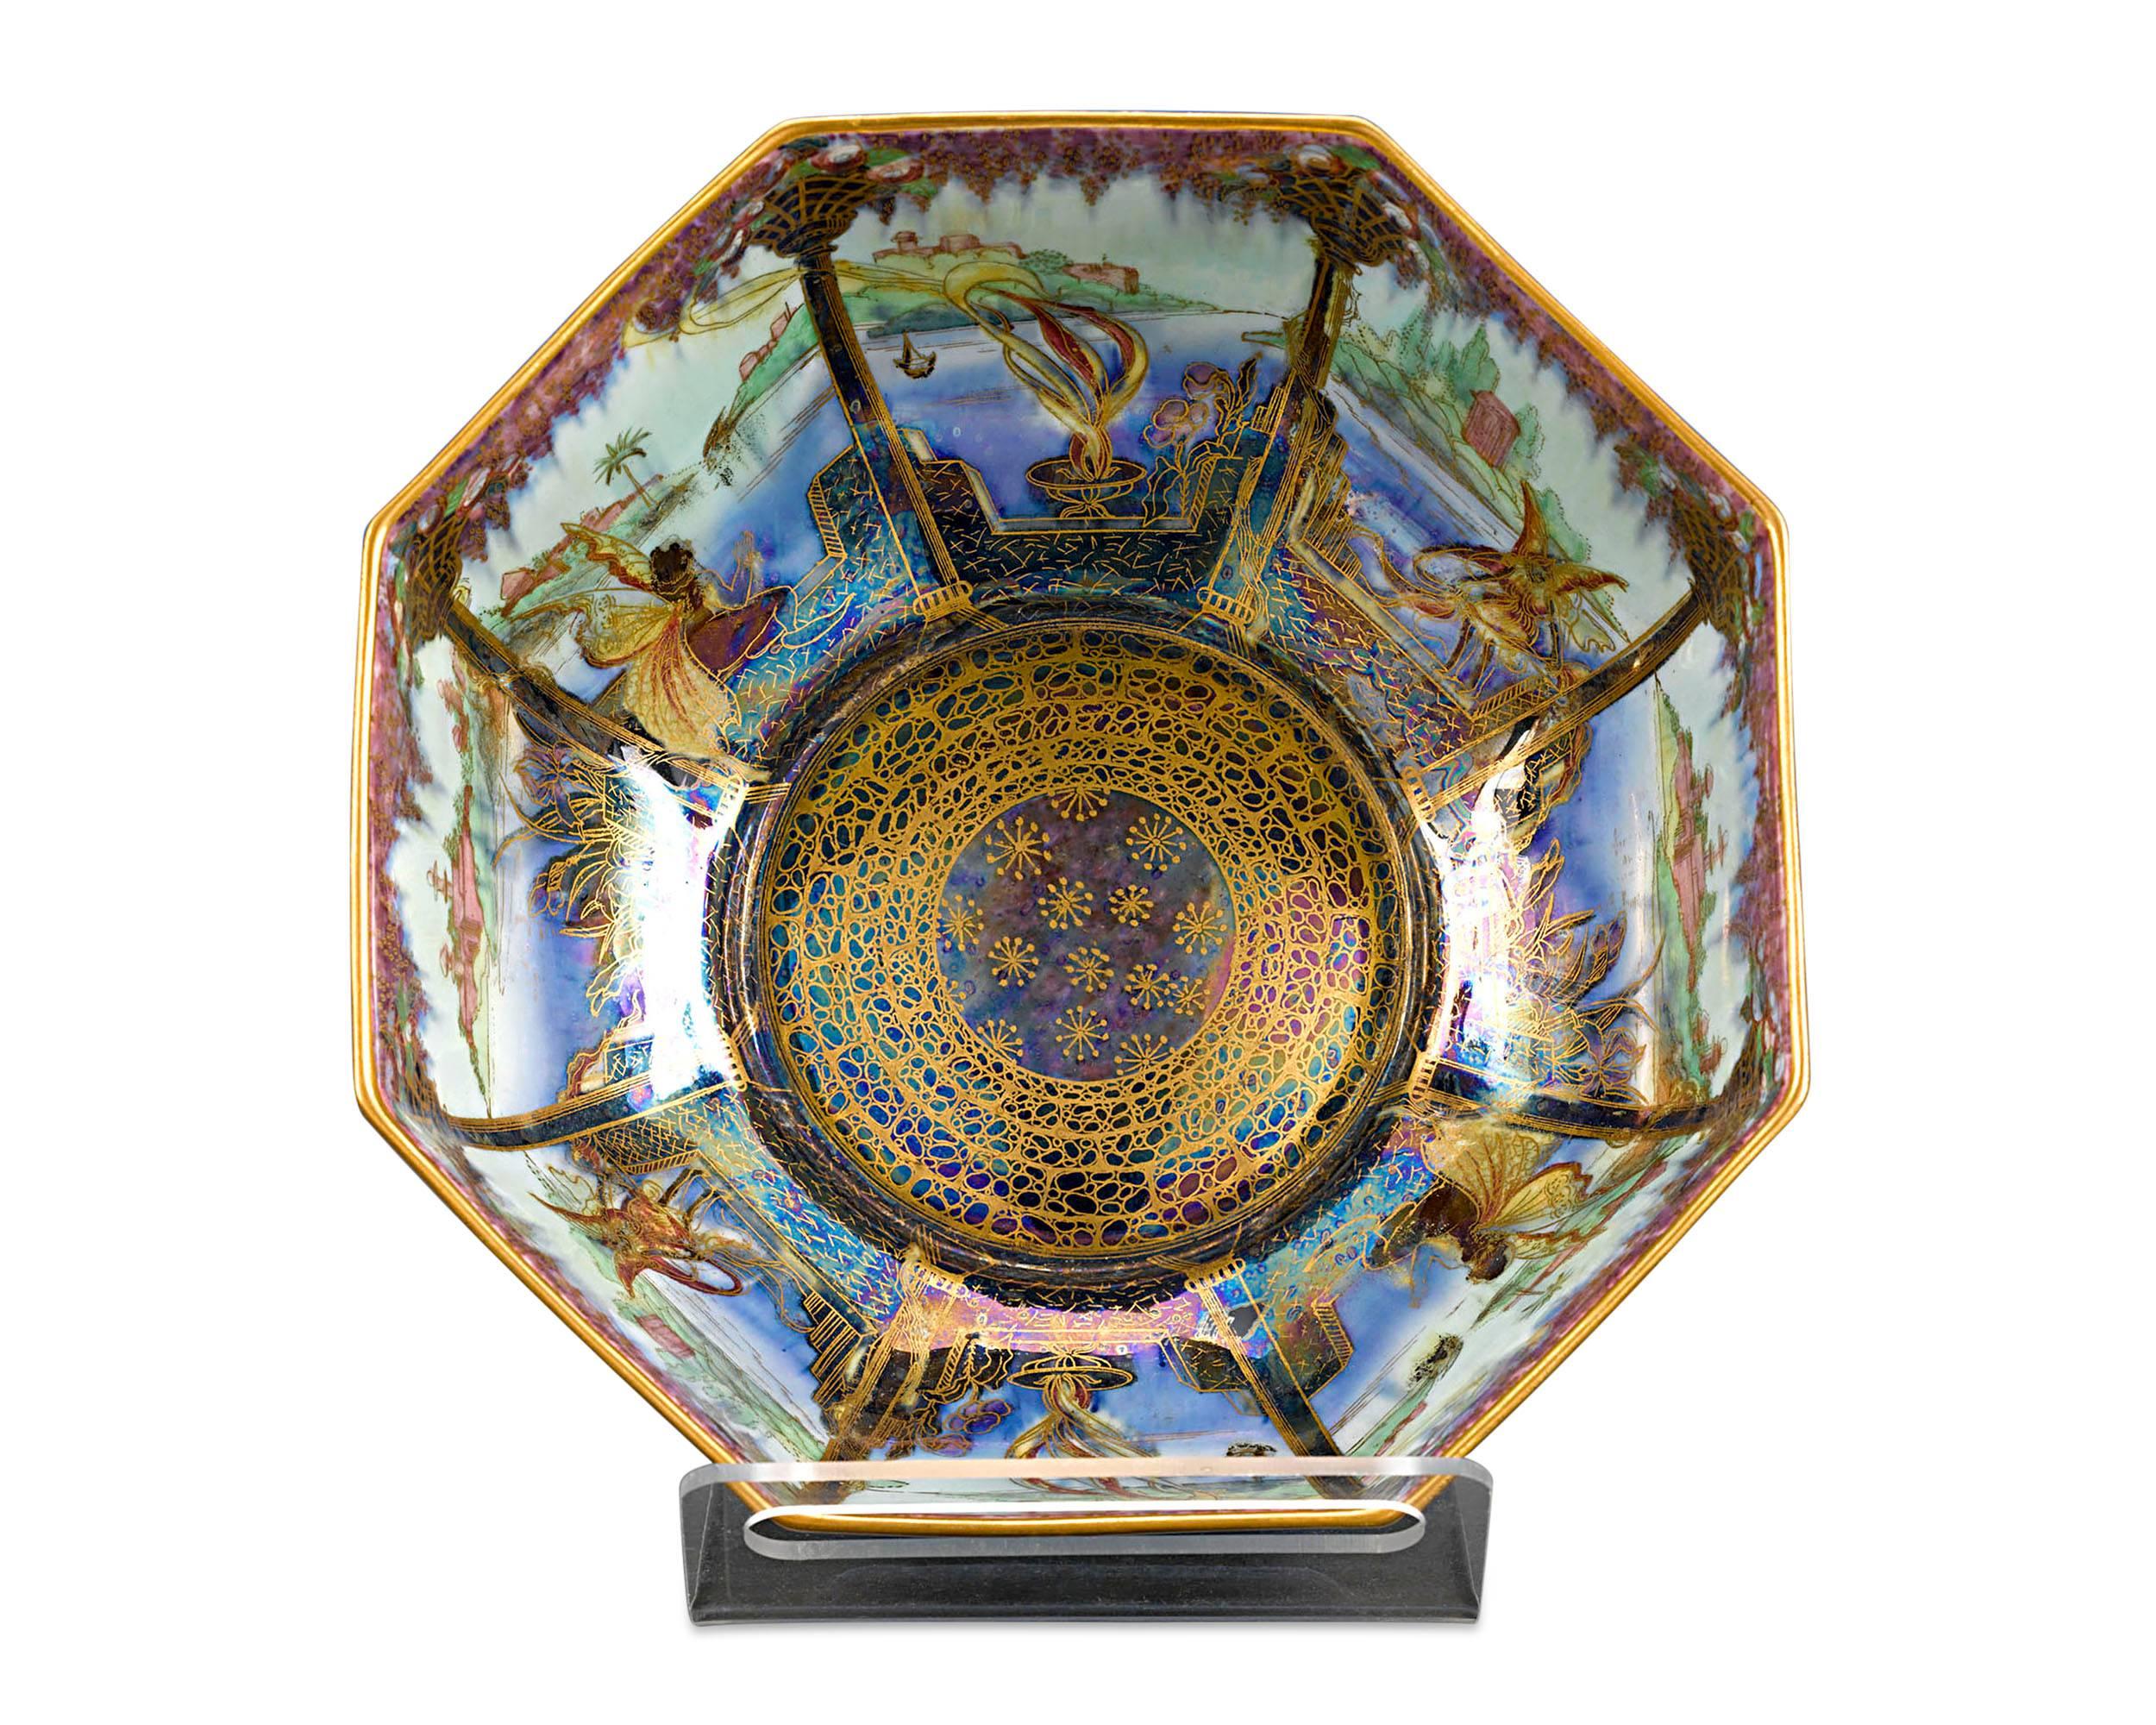 The exotic beauty of Wedgwood Fairyland Lustre is exemplified in this captivating octagonal bowl. Displaying the fantastical creativity for which Fairyland Lustre is so robustly collected, this magnificent bowl exhibits the stunning Moorish pattern